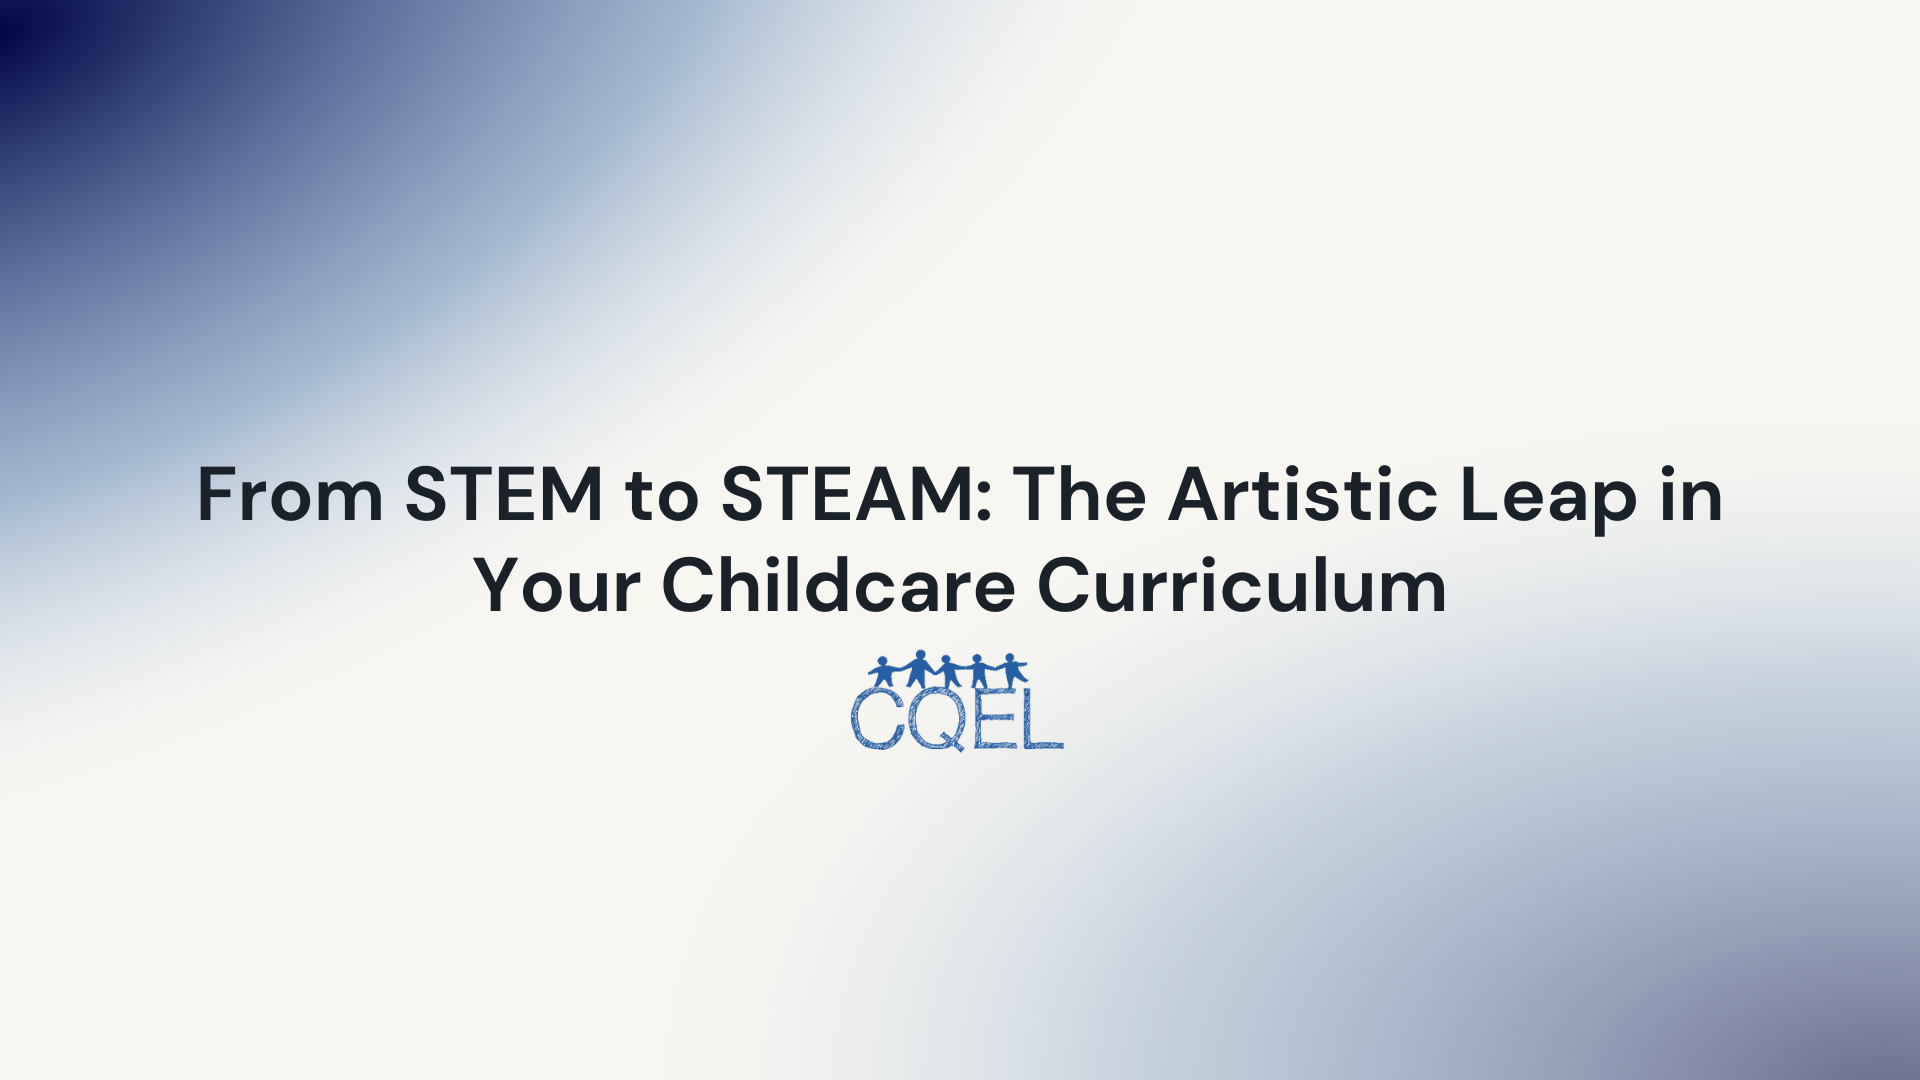 From STEM to STEAM: The Artistic Leap in Your Childcare Curriculum